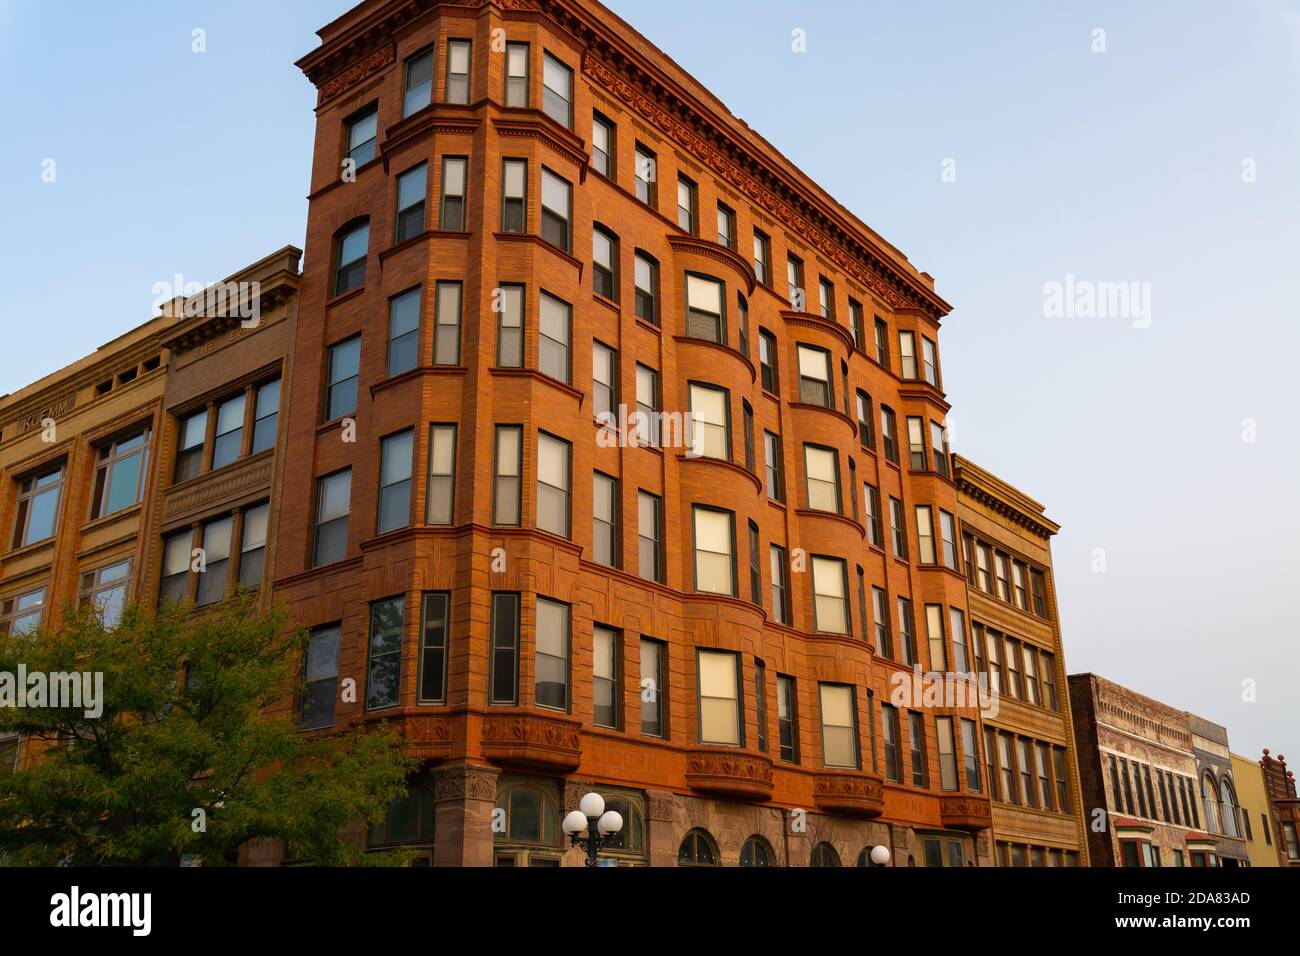 Exterior of brick building in downtown Midwest city.  Bloomington, Illinois, USA Stock Photo